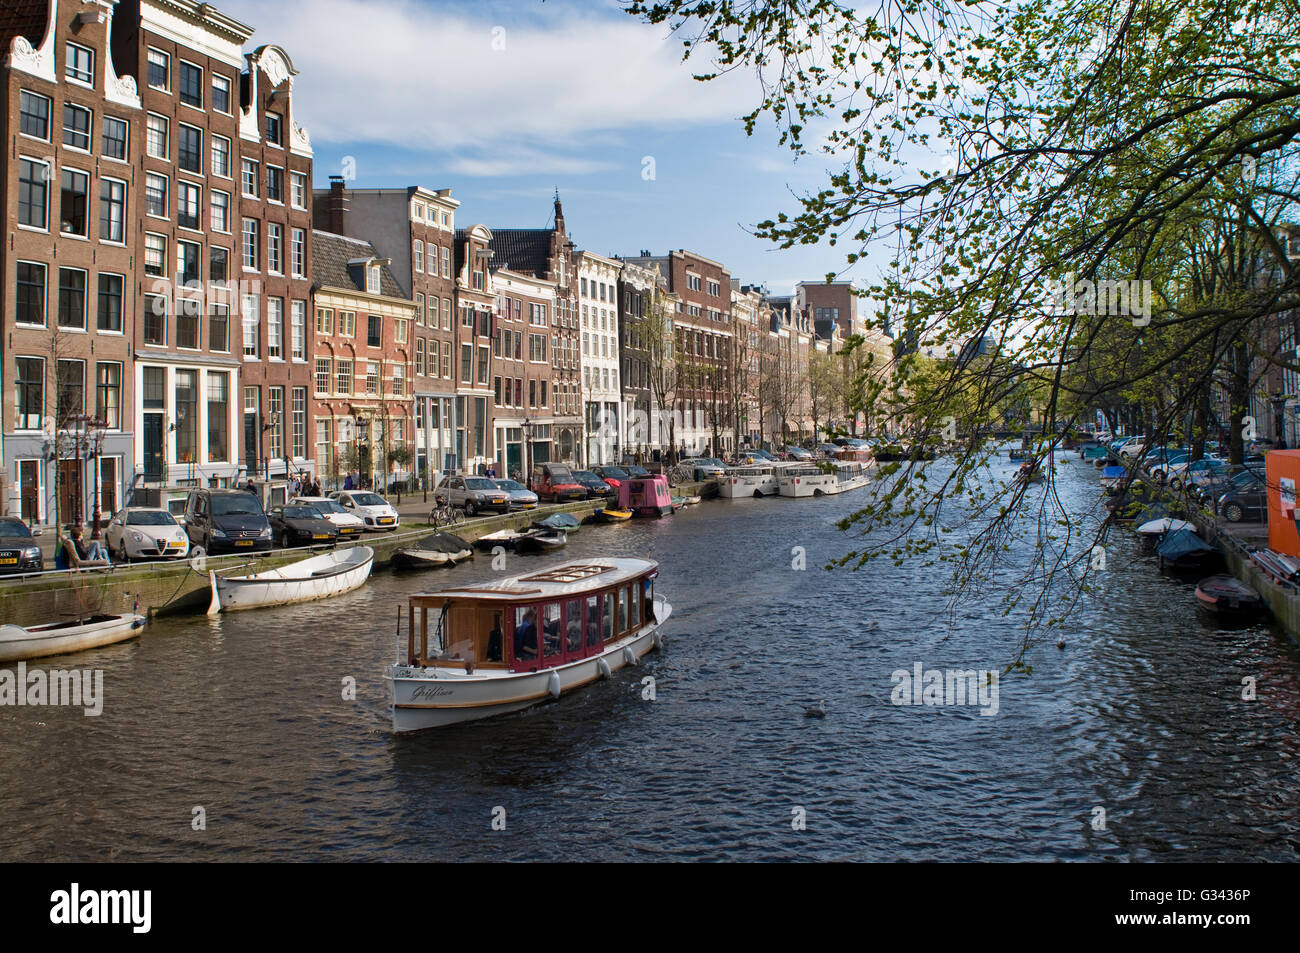 A boat on an Amsterdam canal. Stock Photo